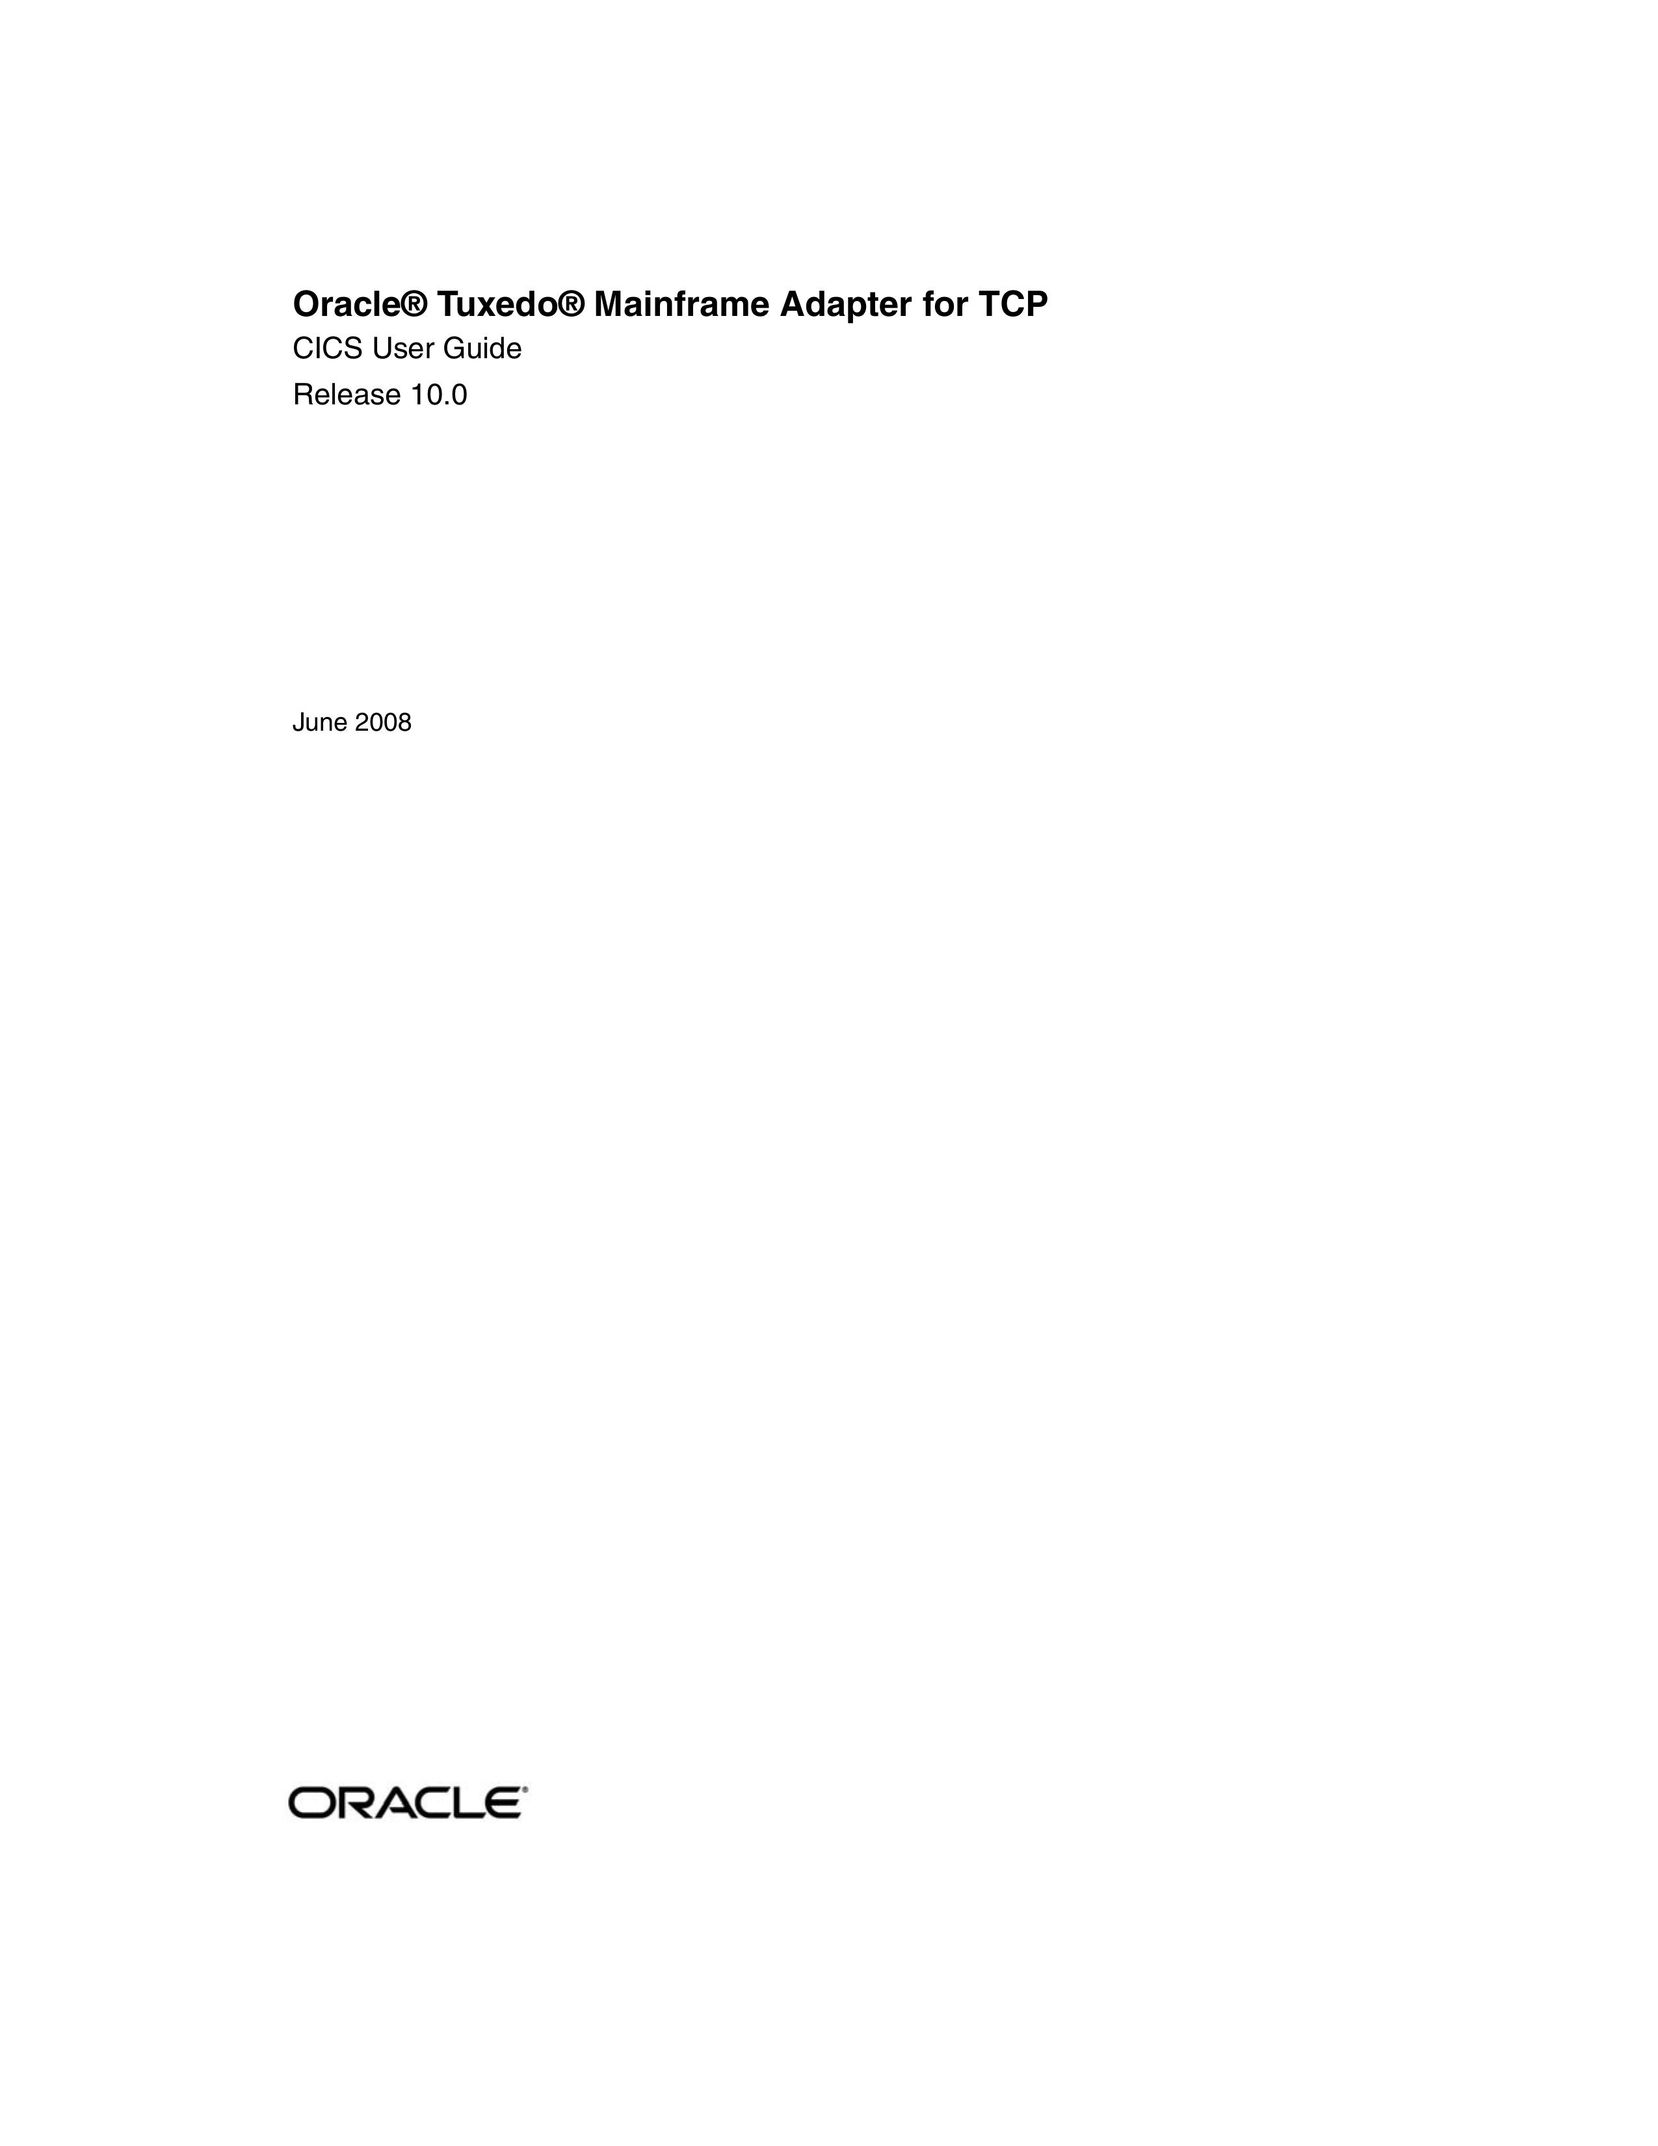 Oracle Audio Technologies Oracle Tuxedo Network Router User Manual